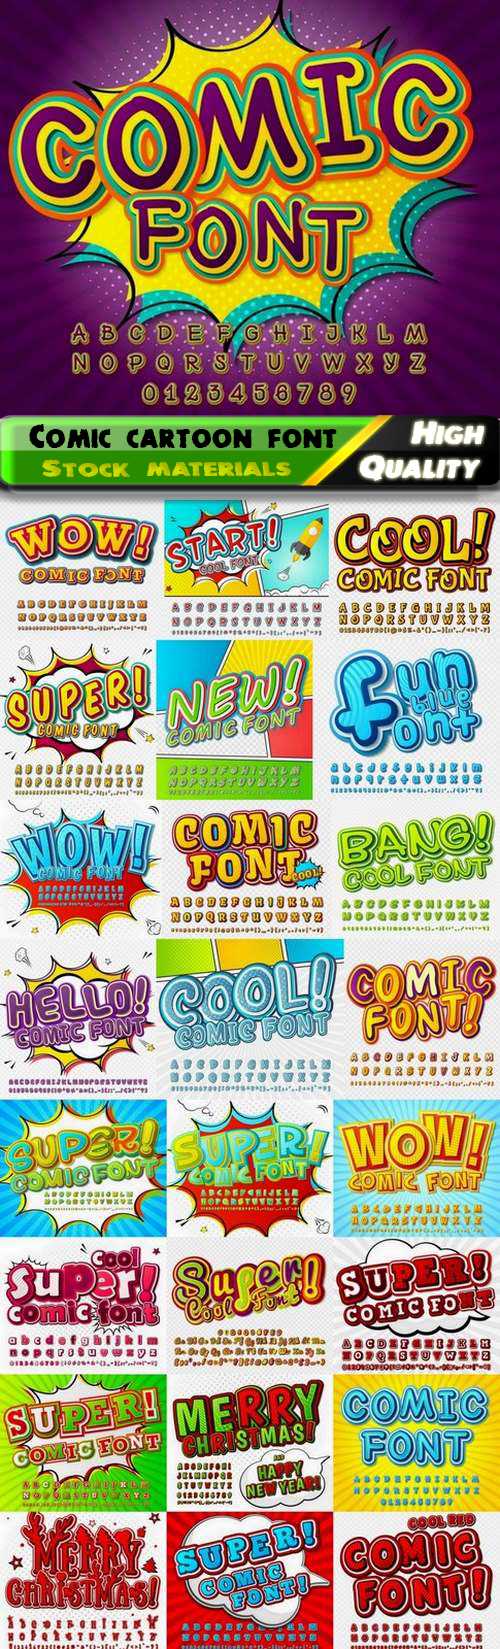 Comic cartoon font and colorful alphabet letters 2 - 25 Eps